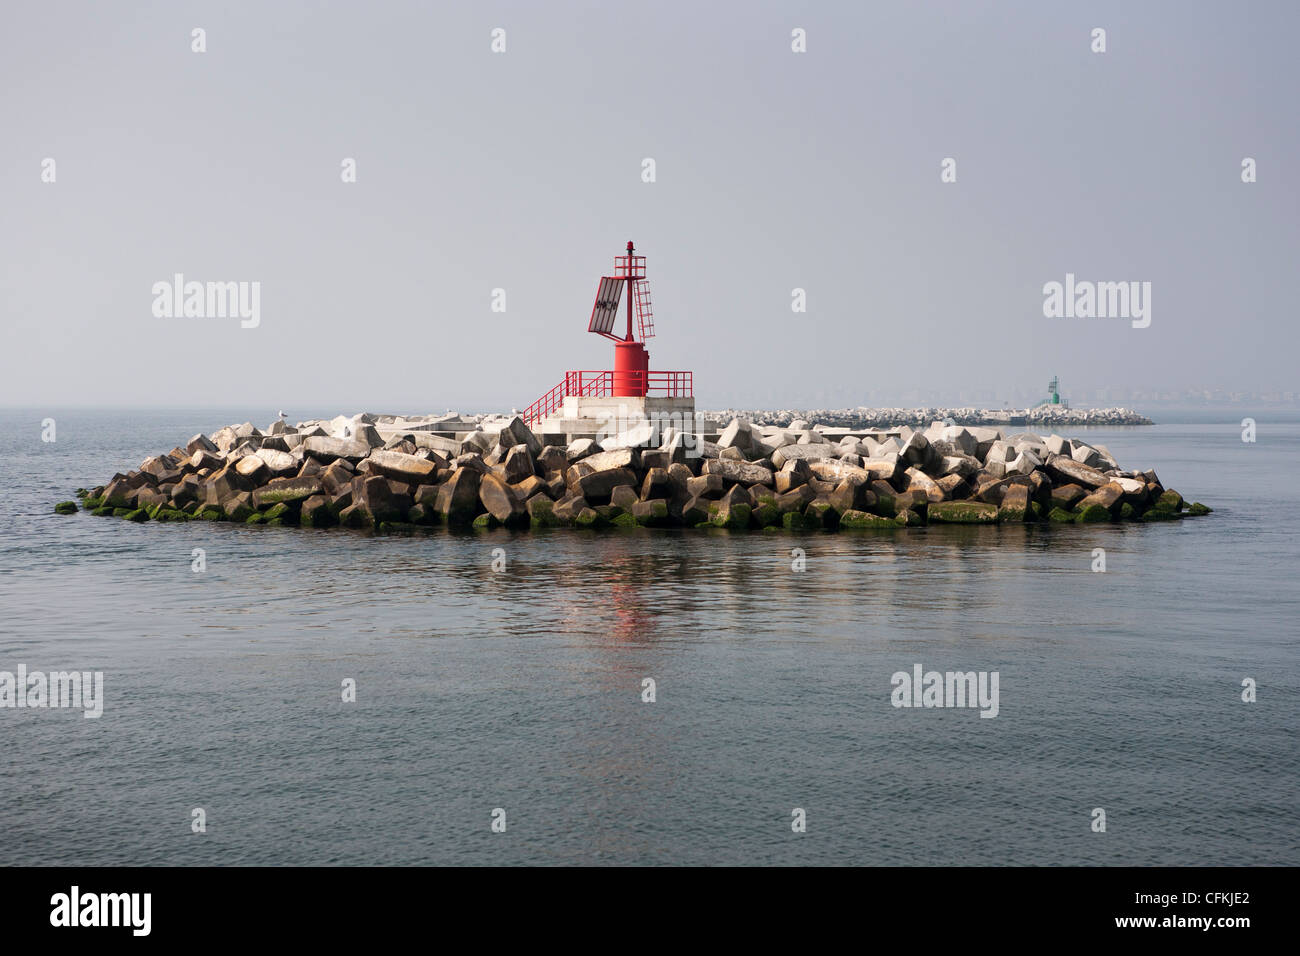 Accropodes for the shore protection of Chioggia , Venezia, on the left side of the bay entrance, as shown by the red tower. Stock Photo